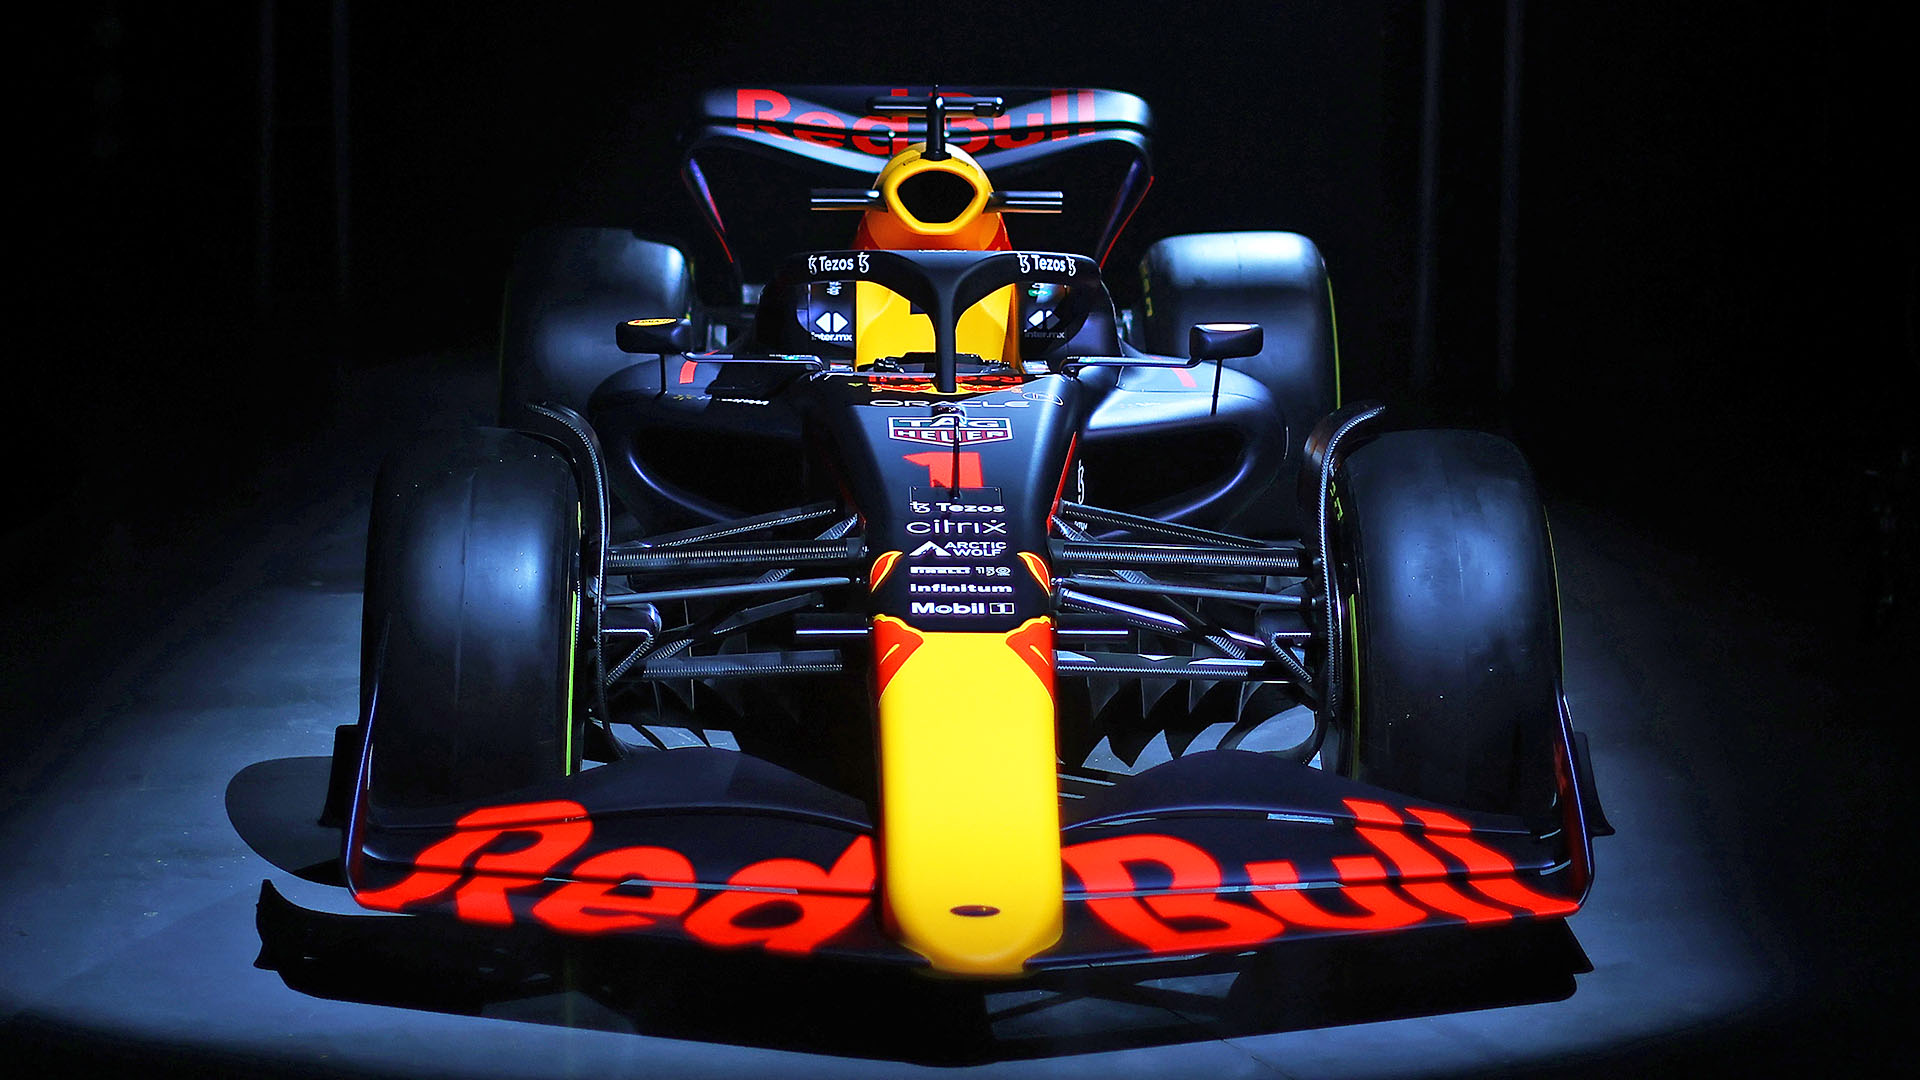 REVEALED: Red Bull show off Verstappen's 2022 title defence challenger, the RB18